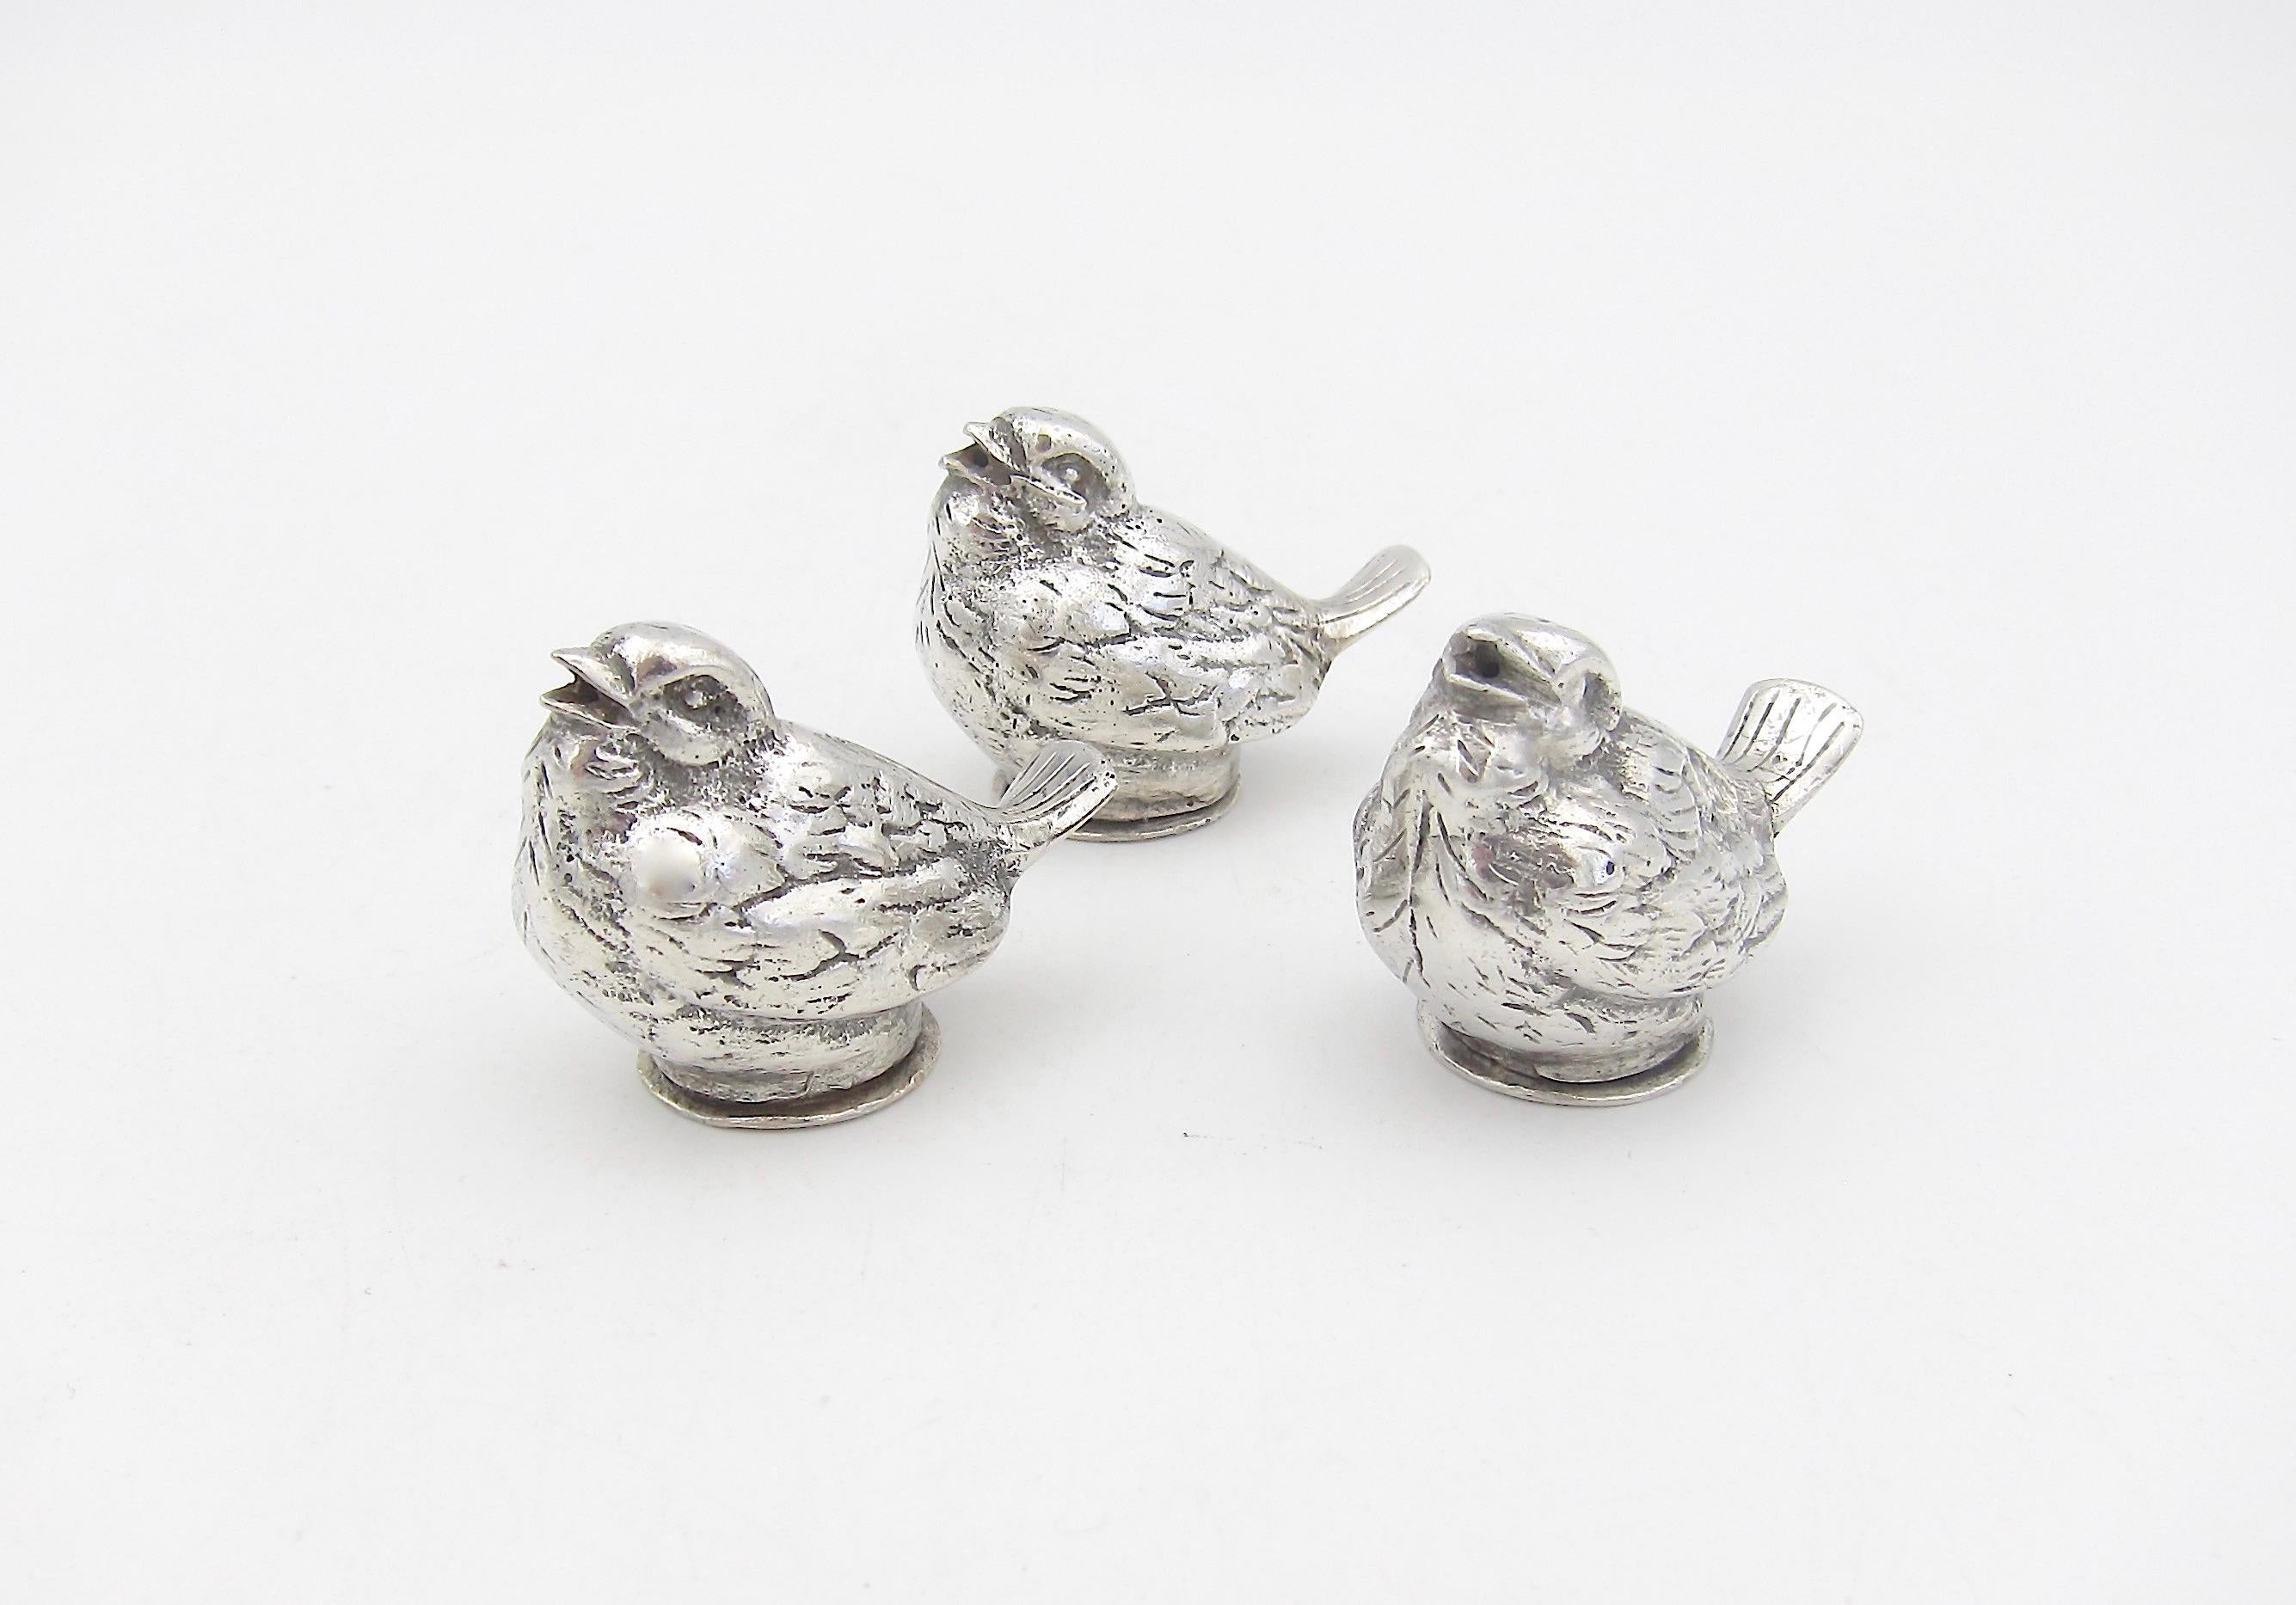 A trio of novelty bird form shakers in Victorian figural style crafted from Continental 900 silver. Historically, these small receptacles were referred to as a 